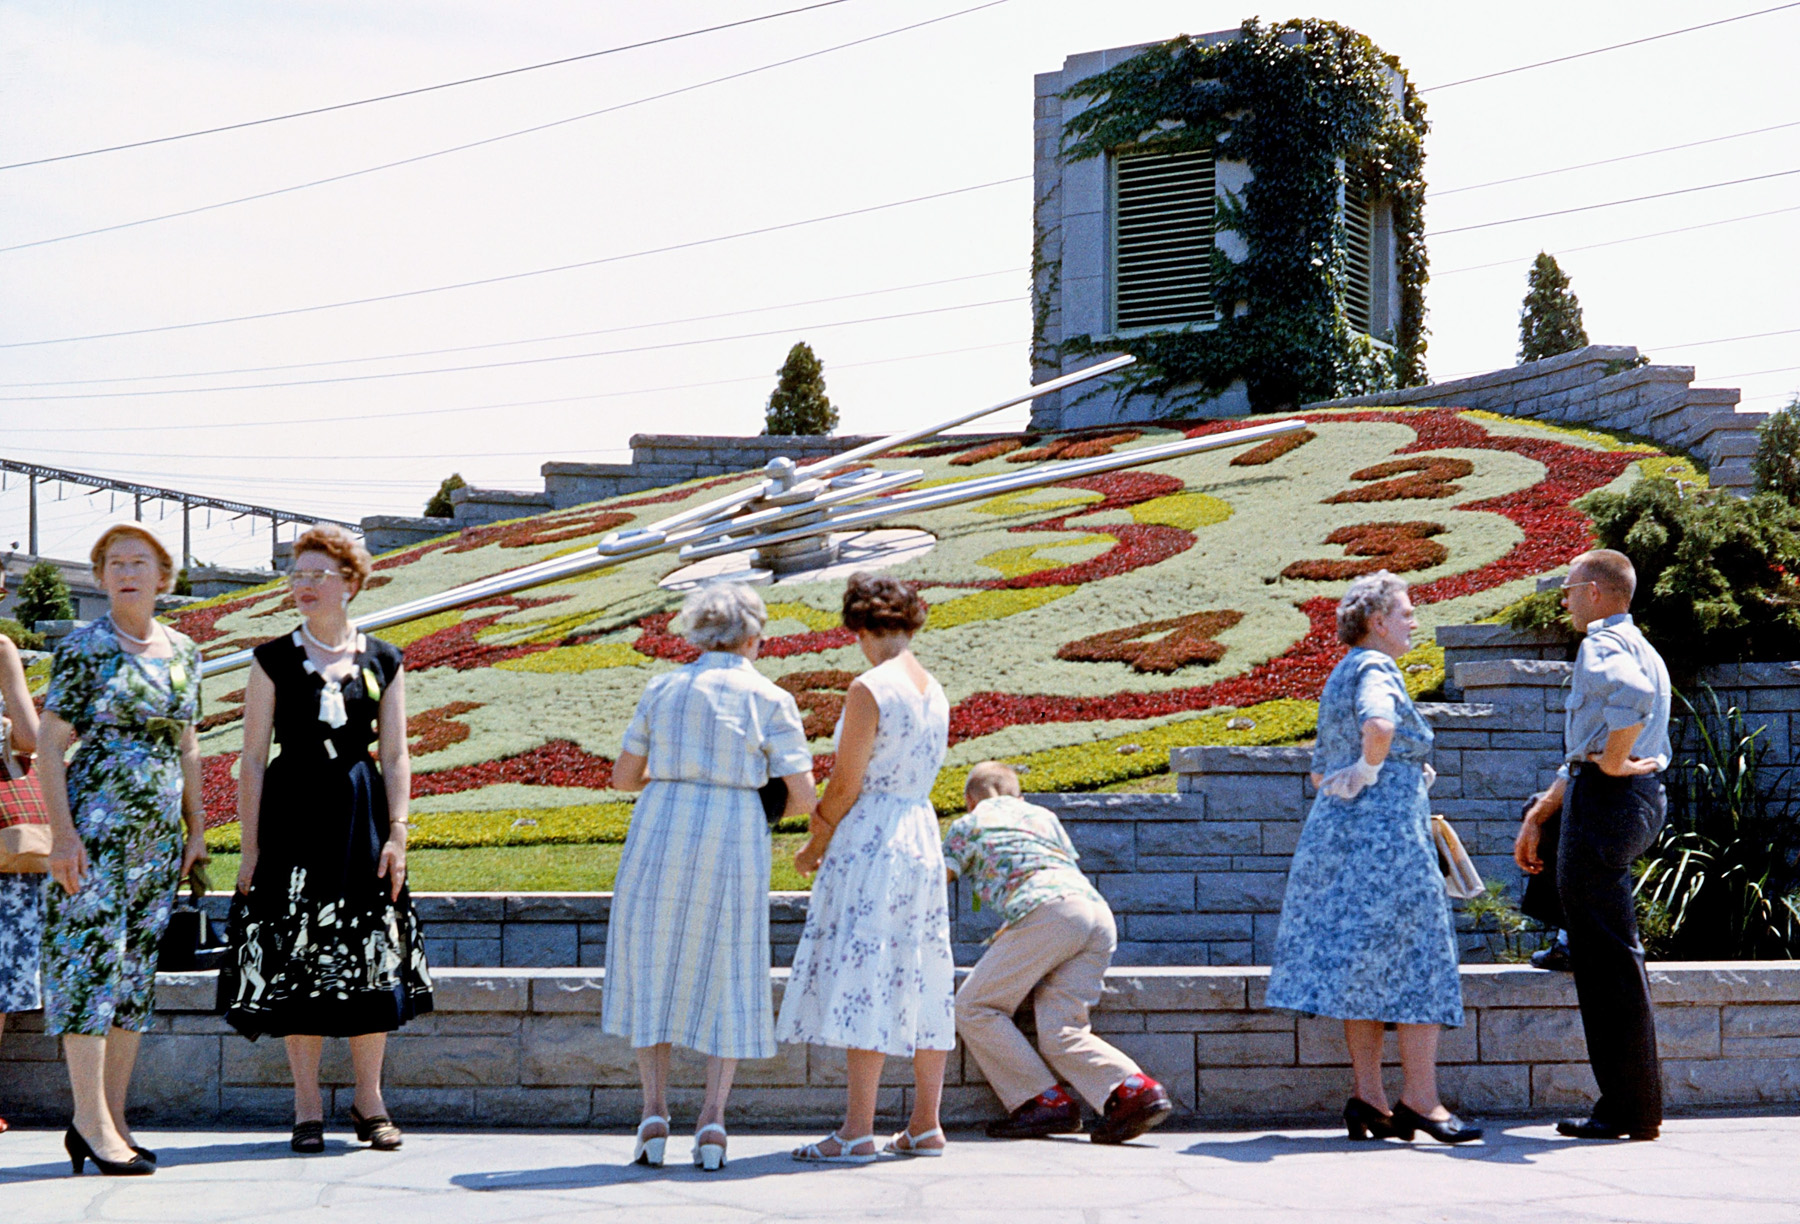 Here's another shot my Dad took in 1958, at the Niagara Parks Commission's Floral Clock, by the Adam Beck hydroelectric generating station on the Canadian side of the Niagara Gorge, a few miles downriver from The Falls. Directly across from here is the massive Robert Moses hydro plant on the U.S. side. Fashions sure have changed in 55 years. View full size.